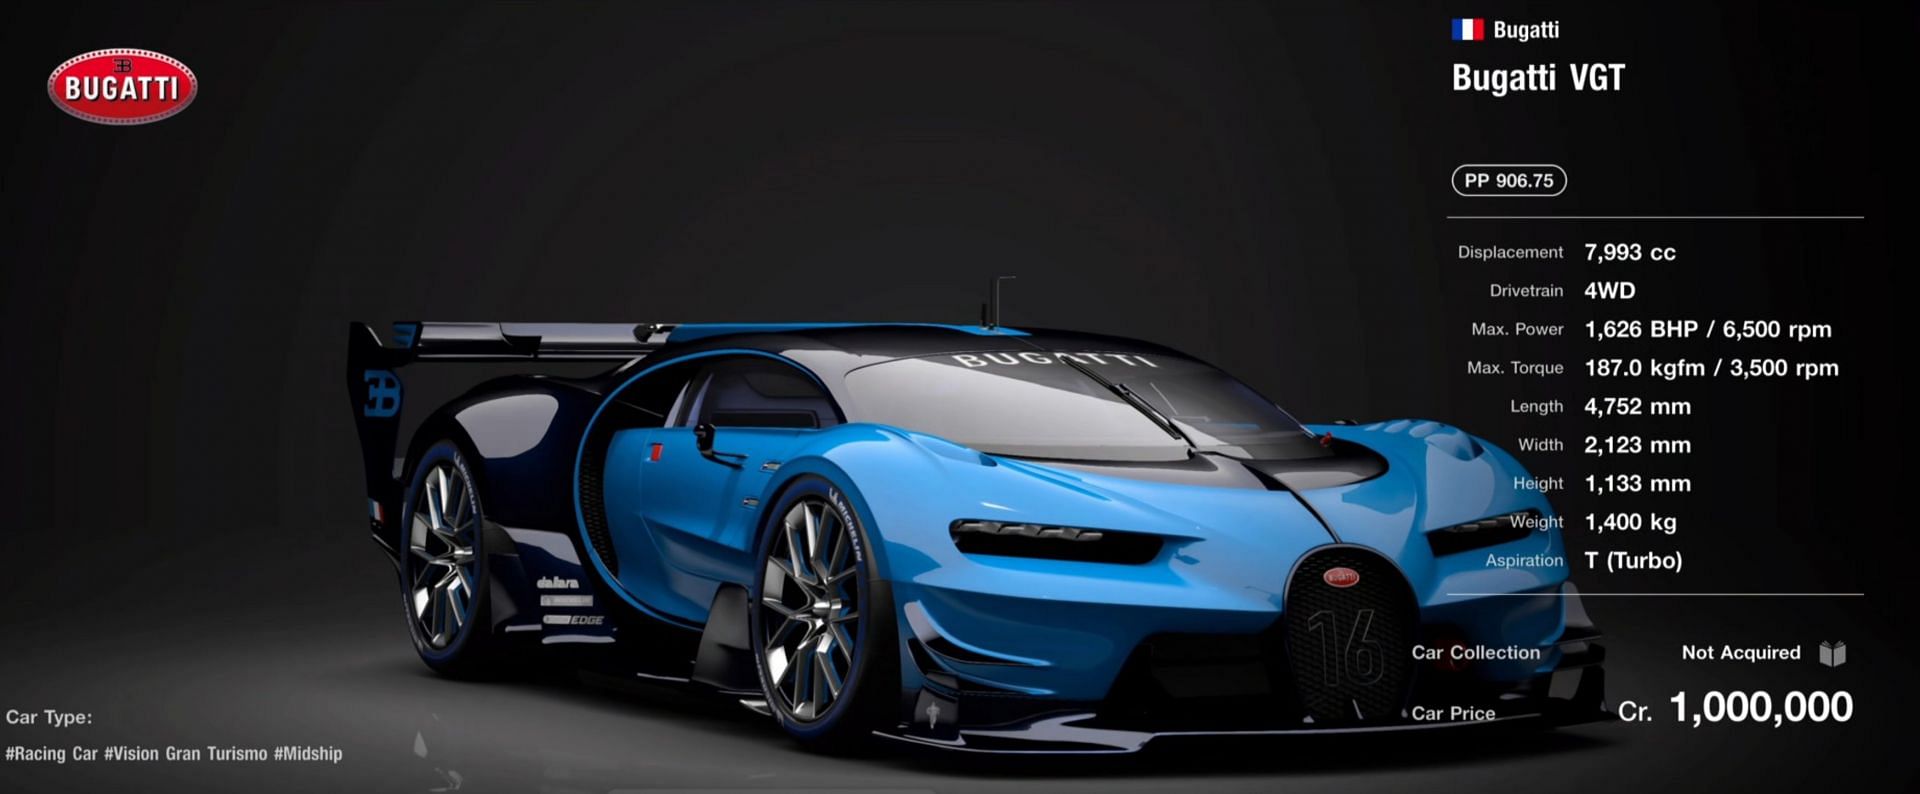 There is no shame in being in third place, as this Bugatti shows with its 1600+ BHP (Image via Sony)